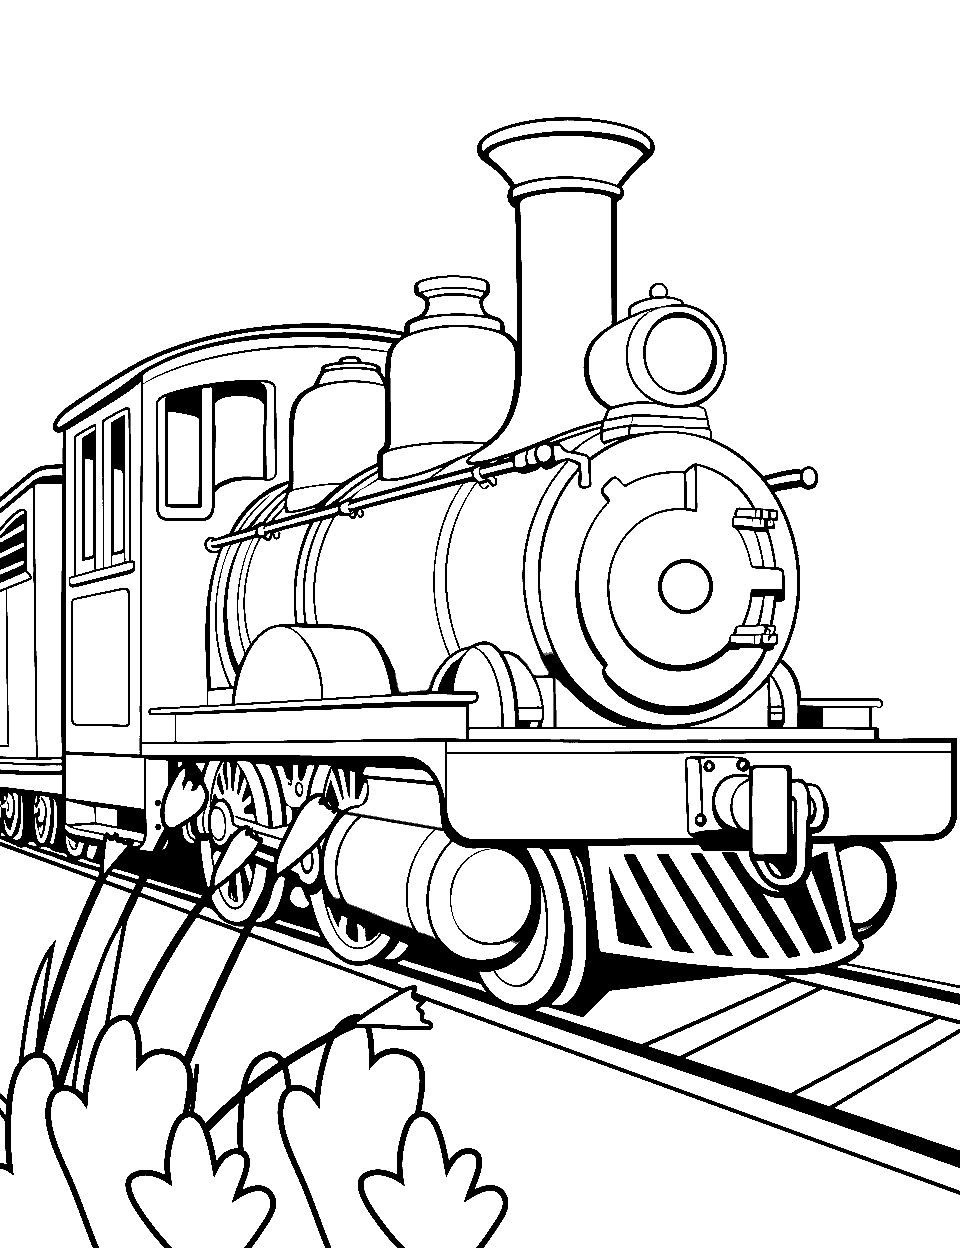 Steam Engine Train Coloring Page - A large steam engine on a rail track.